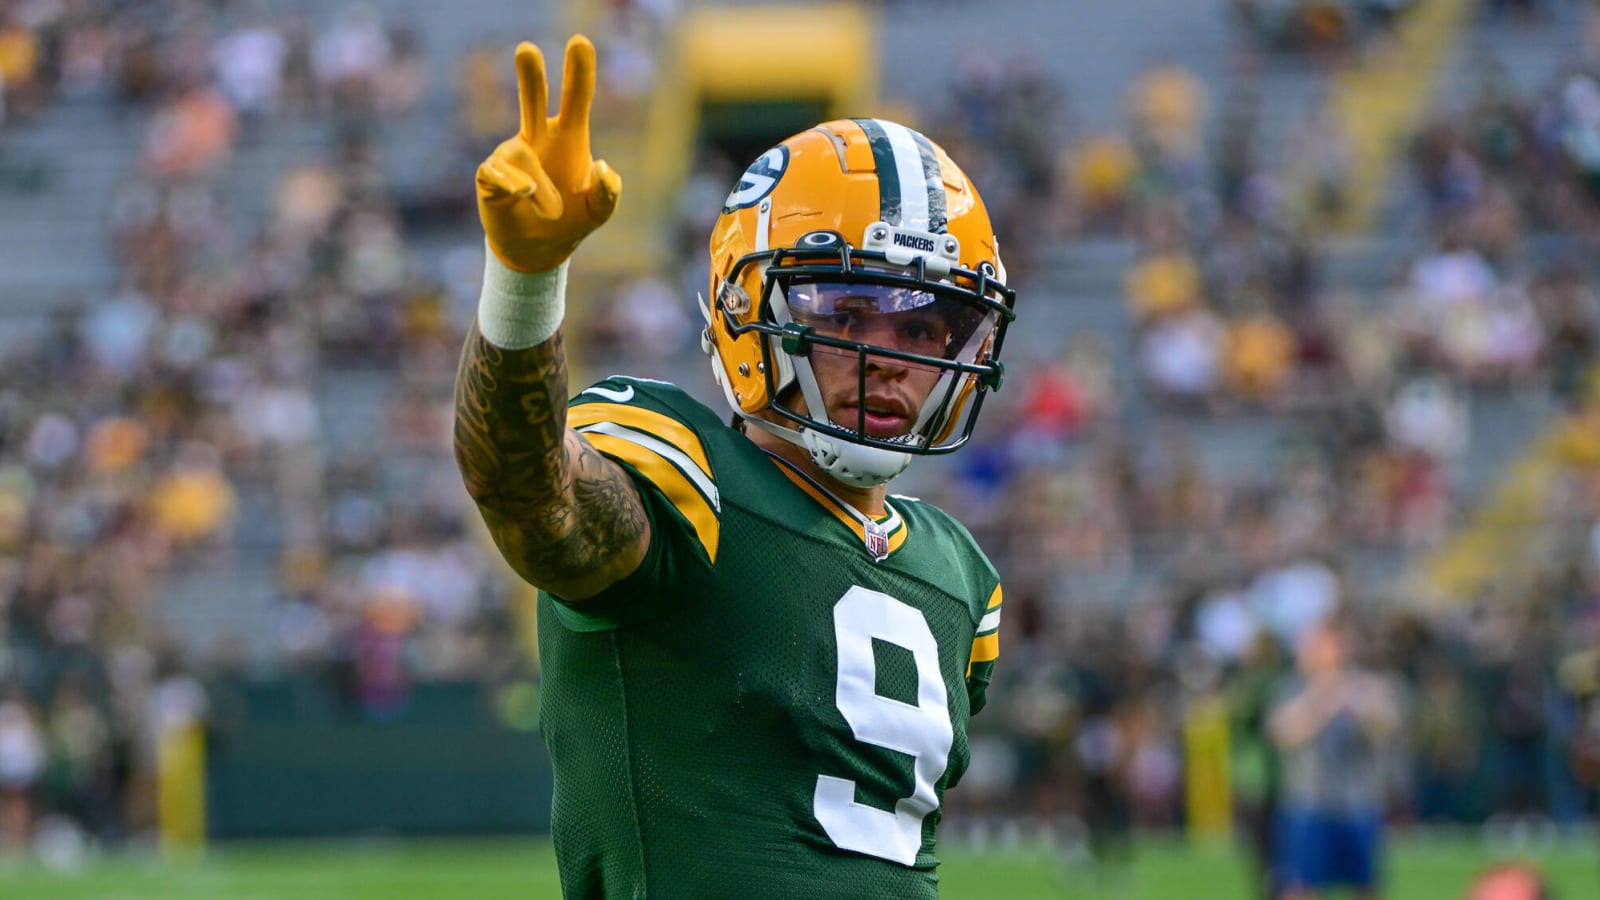 Concerning injuries to Packers duo putting pressure on Jordan Love